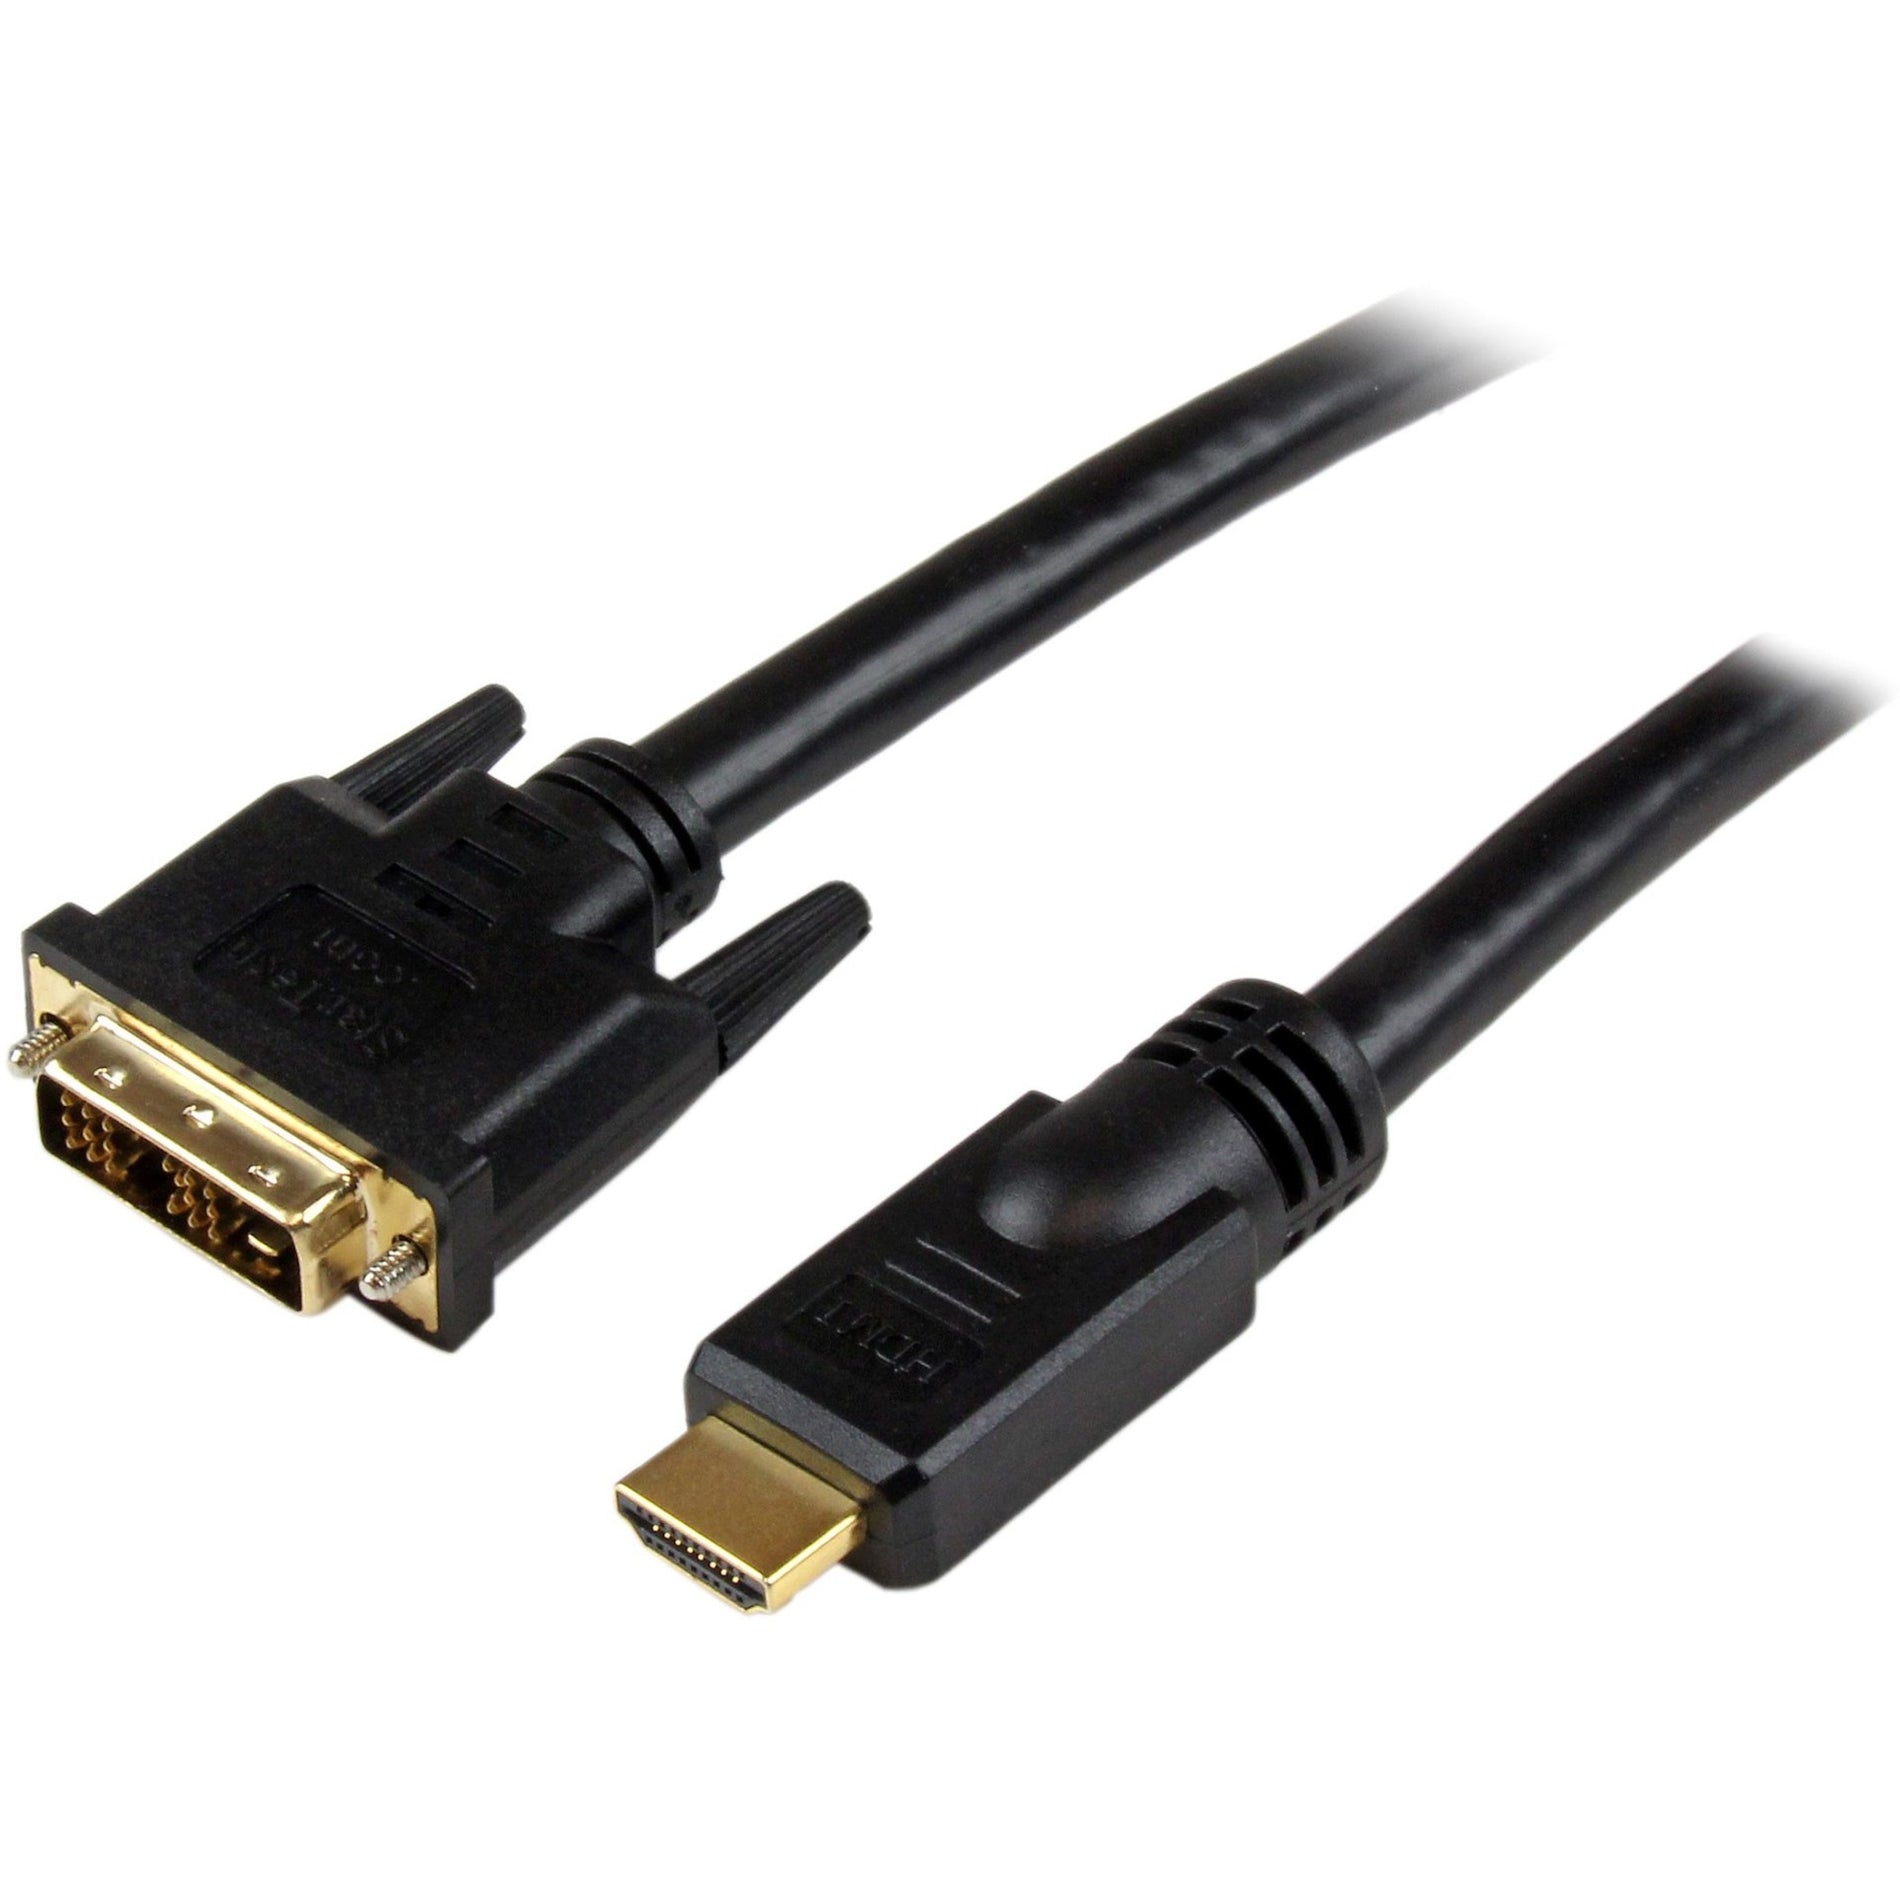 StarTech.com HDMIDVIMM30 30 ft HDMI to DVI-D Cable - M/M, Molded, Passive, Strain Relief, Copper Conductor, Shielded, 24 AWG, Nickel Plated Connectors, Black